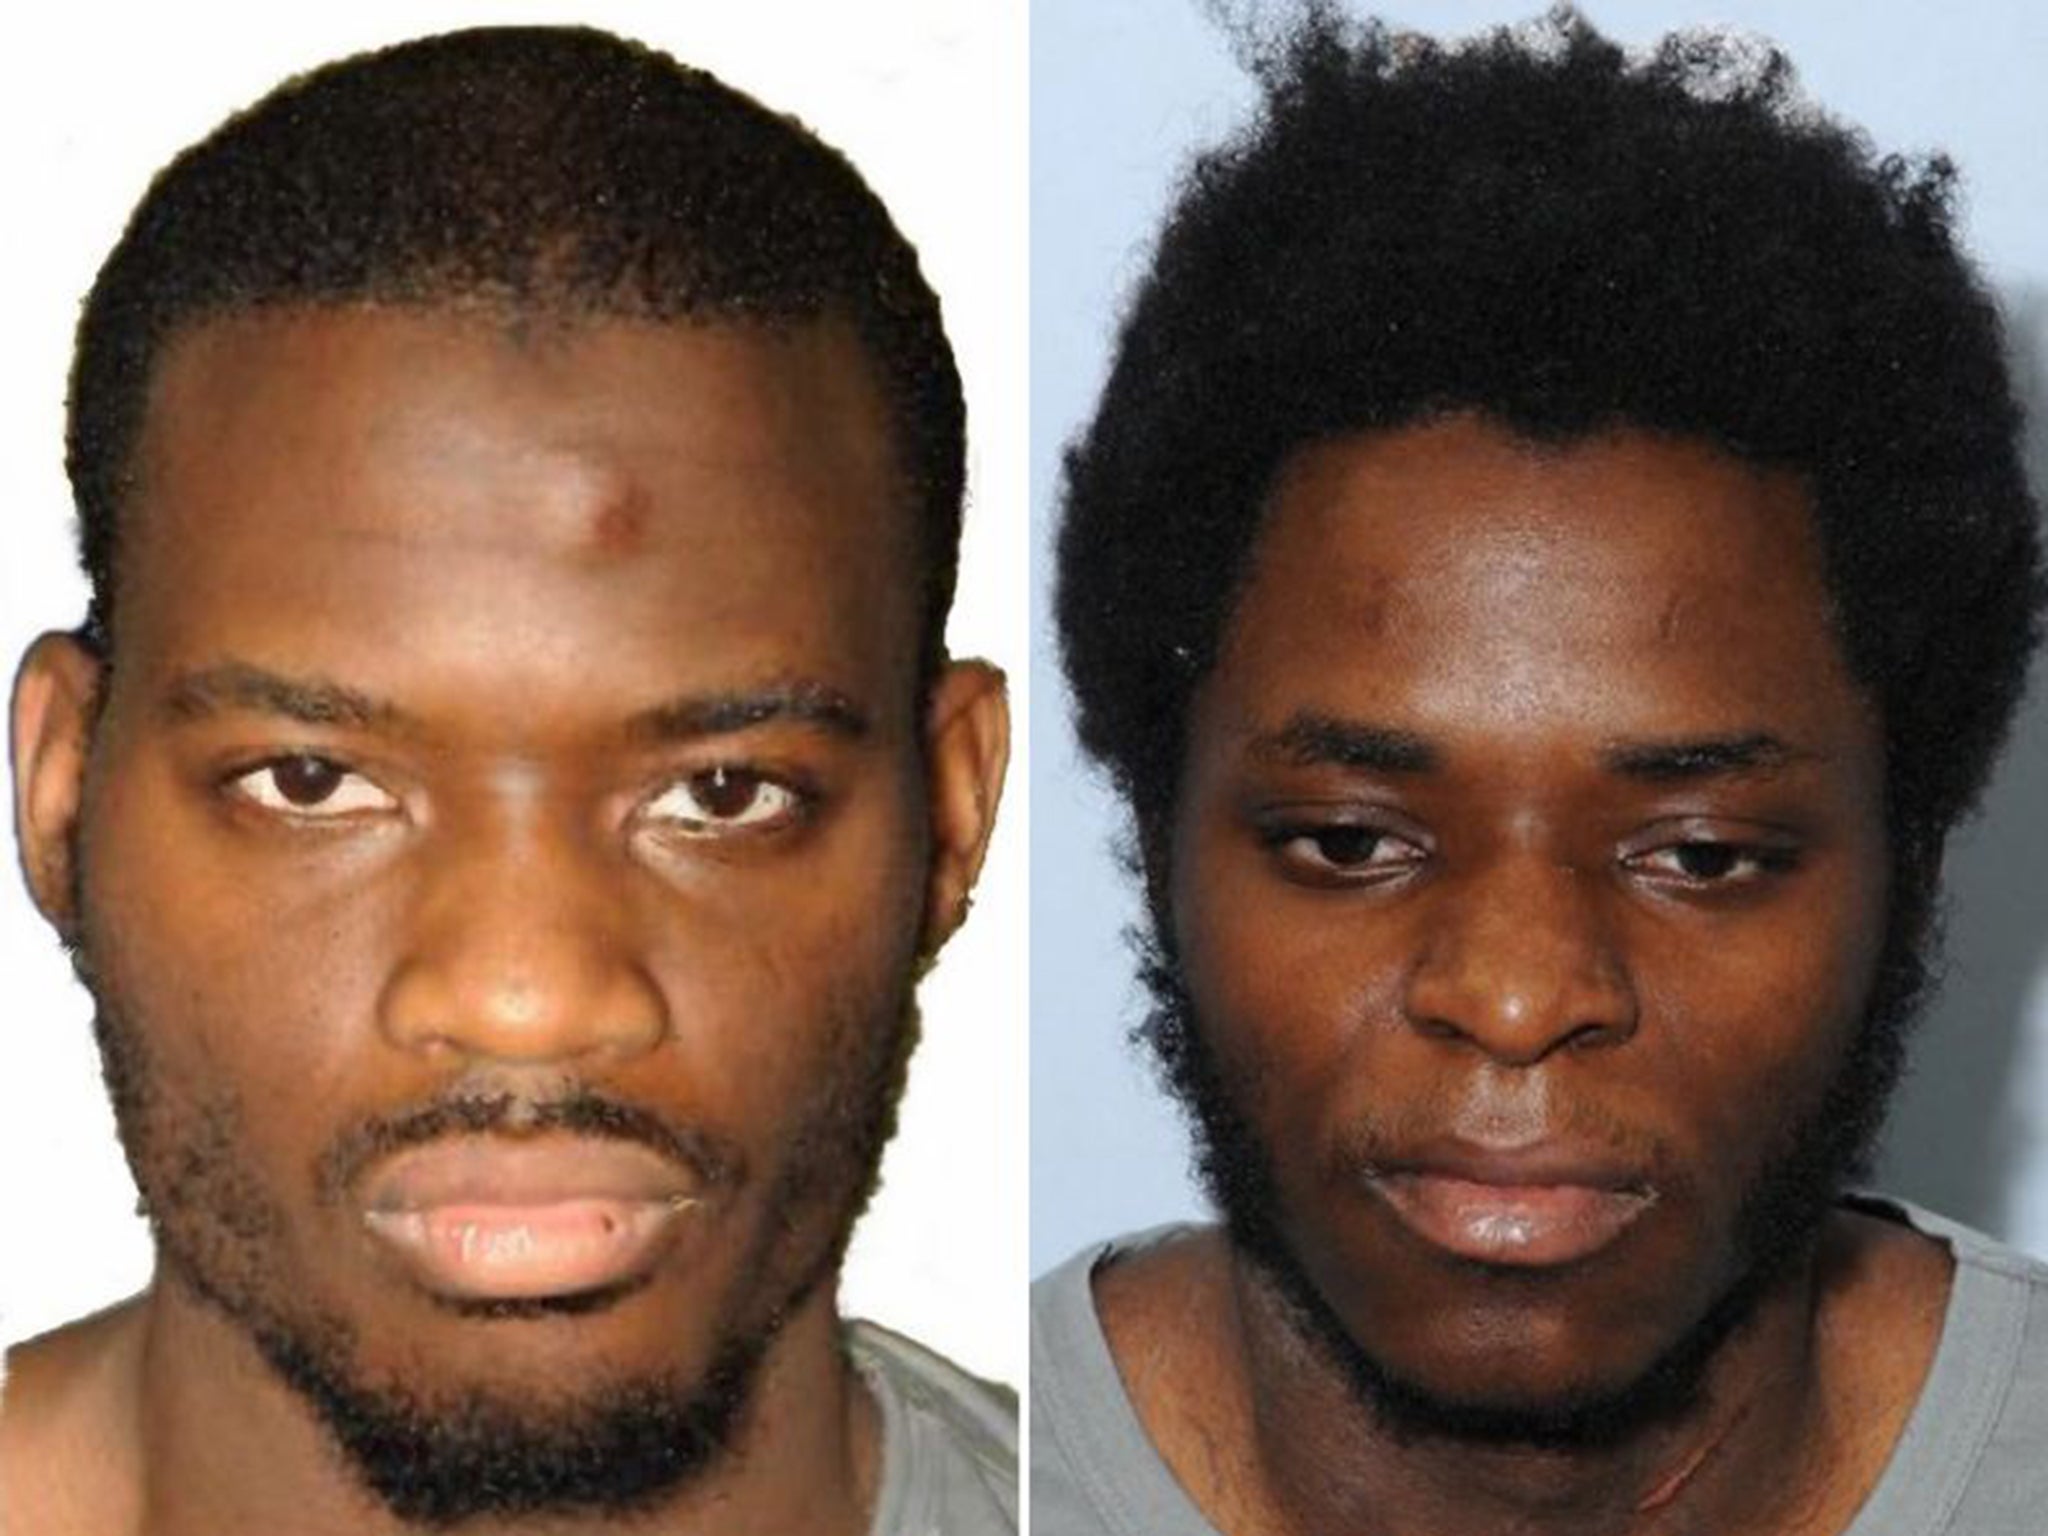 Lee Rigby's killers, Michael Adebolajo, left, and Michael Adebowale, were given life sentences for their terrorist motive